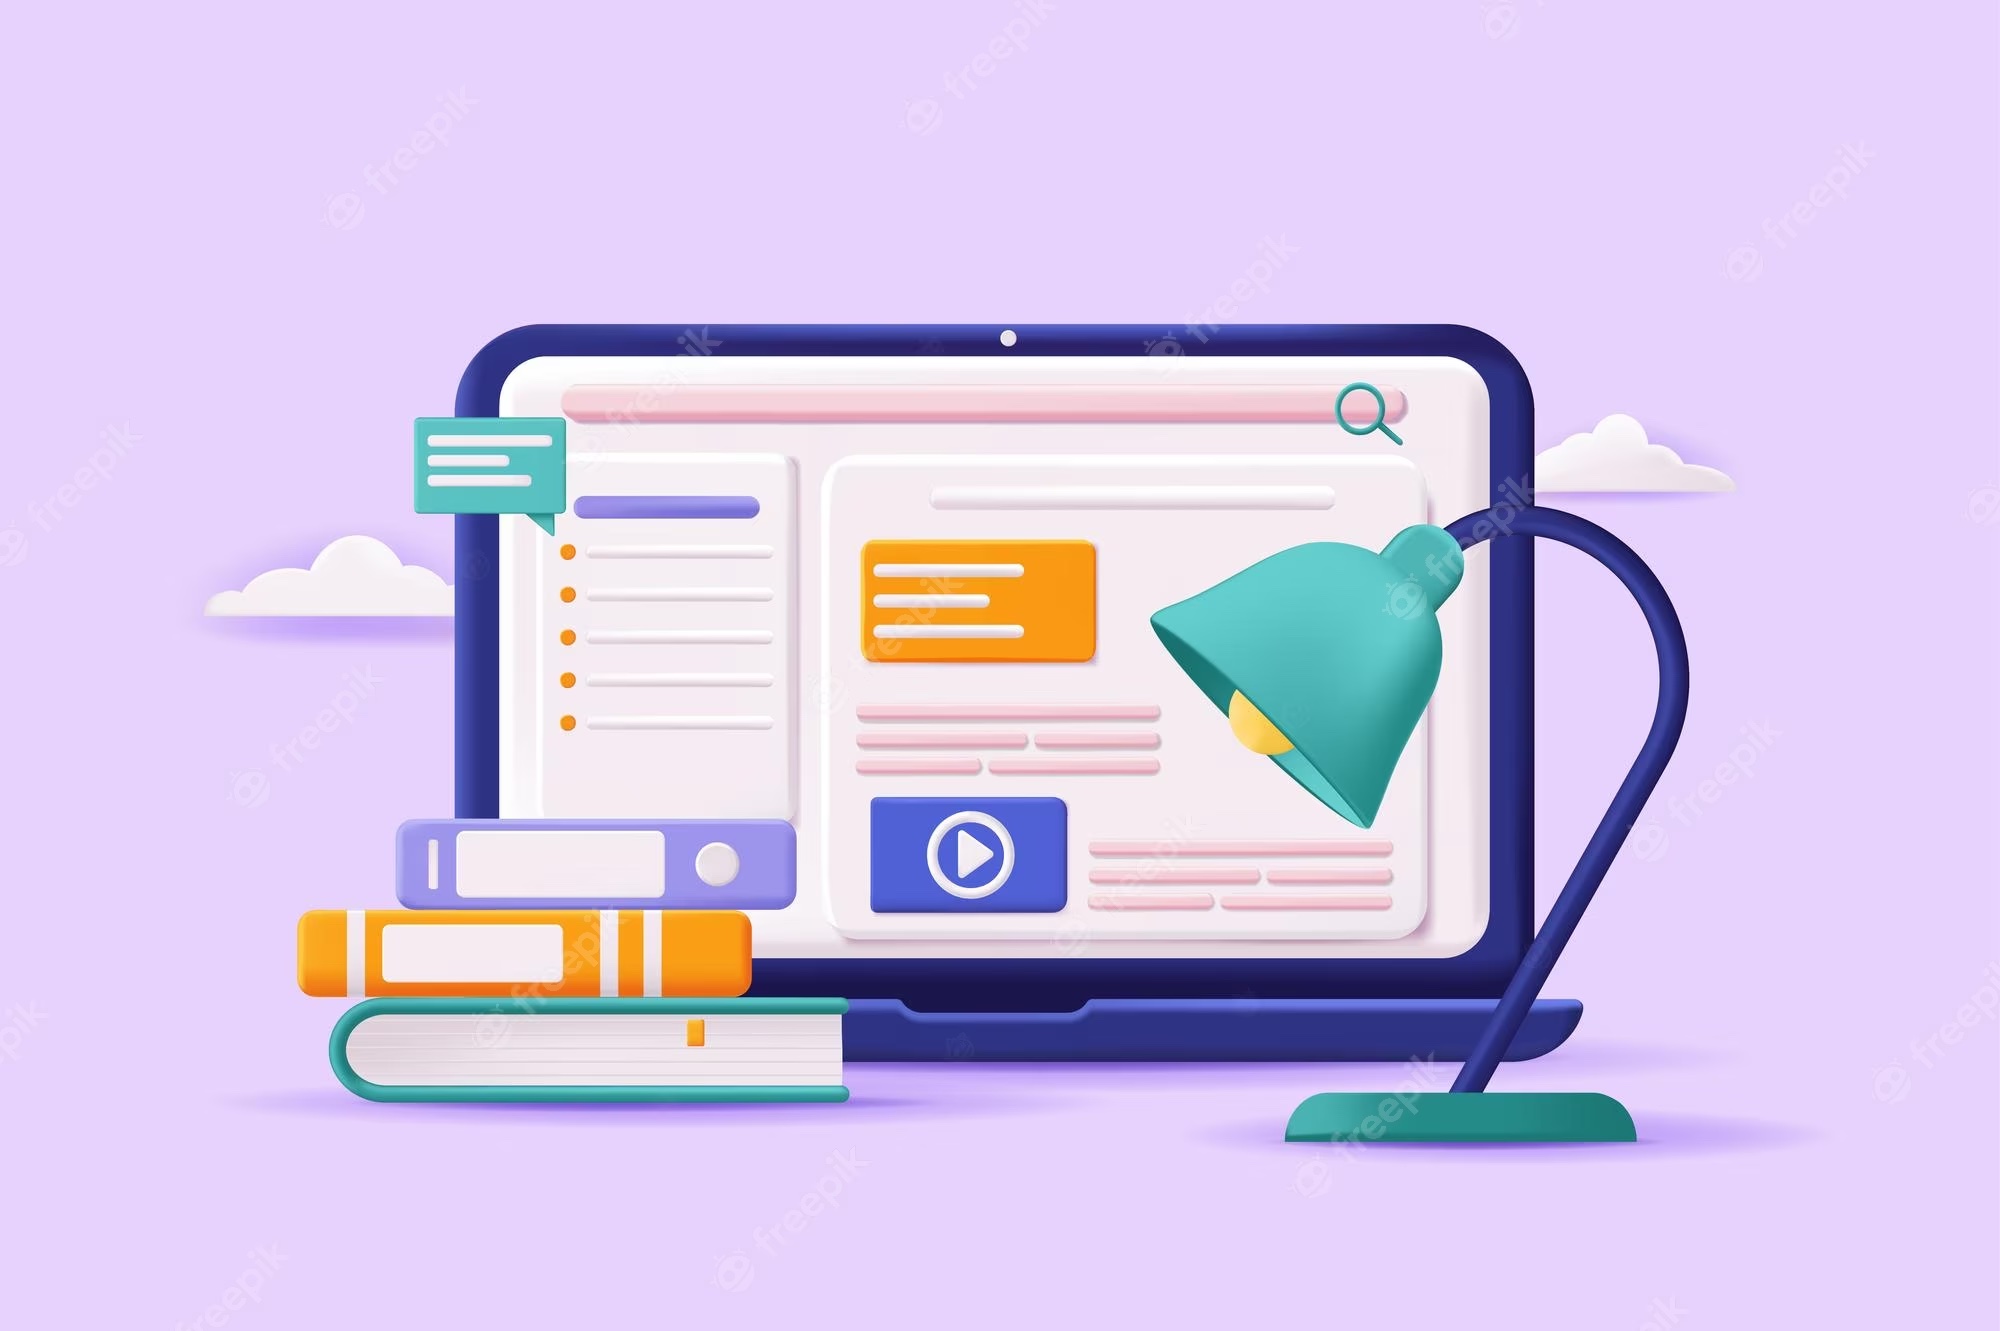 education-elearning-concept-3d-illustration-icon-composition-with-site-interface-with-educational-platform-online-lessons-video-lectures-books-vector-illustration-modern-web-design_198565-1659